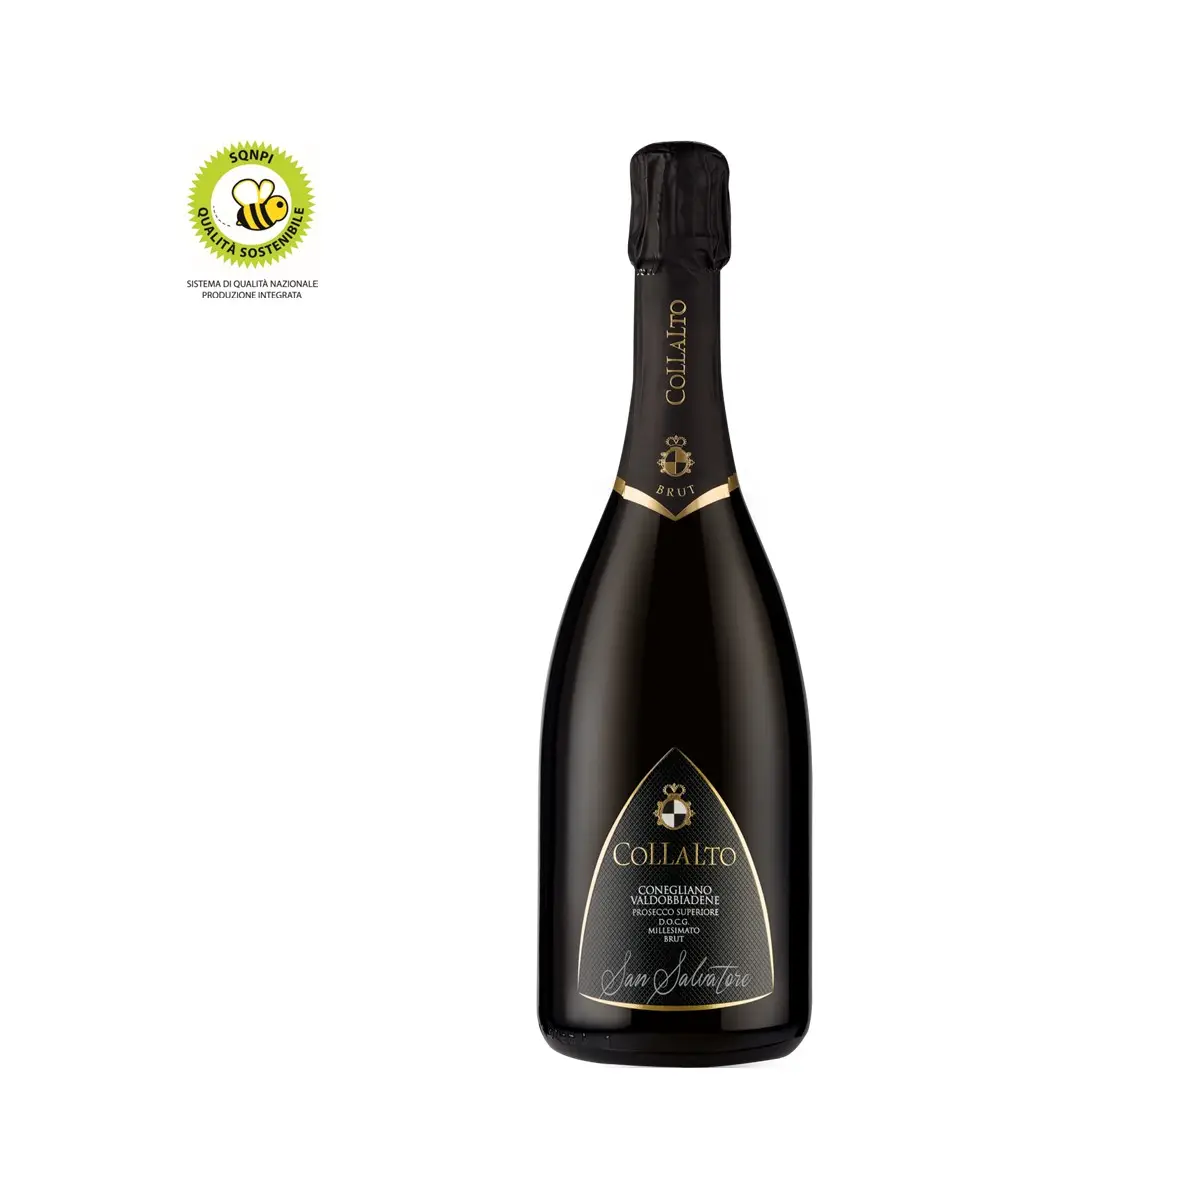 MADE IN ITALY BEST TOP QUALITY WINE SPARKLING WHITE WINE PROSECCO 2020 DOCG BRUT 75 CL FOR HORECA